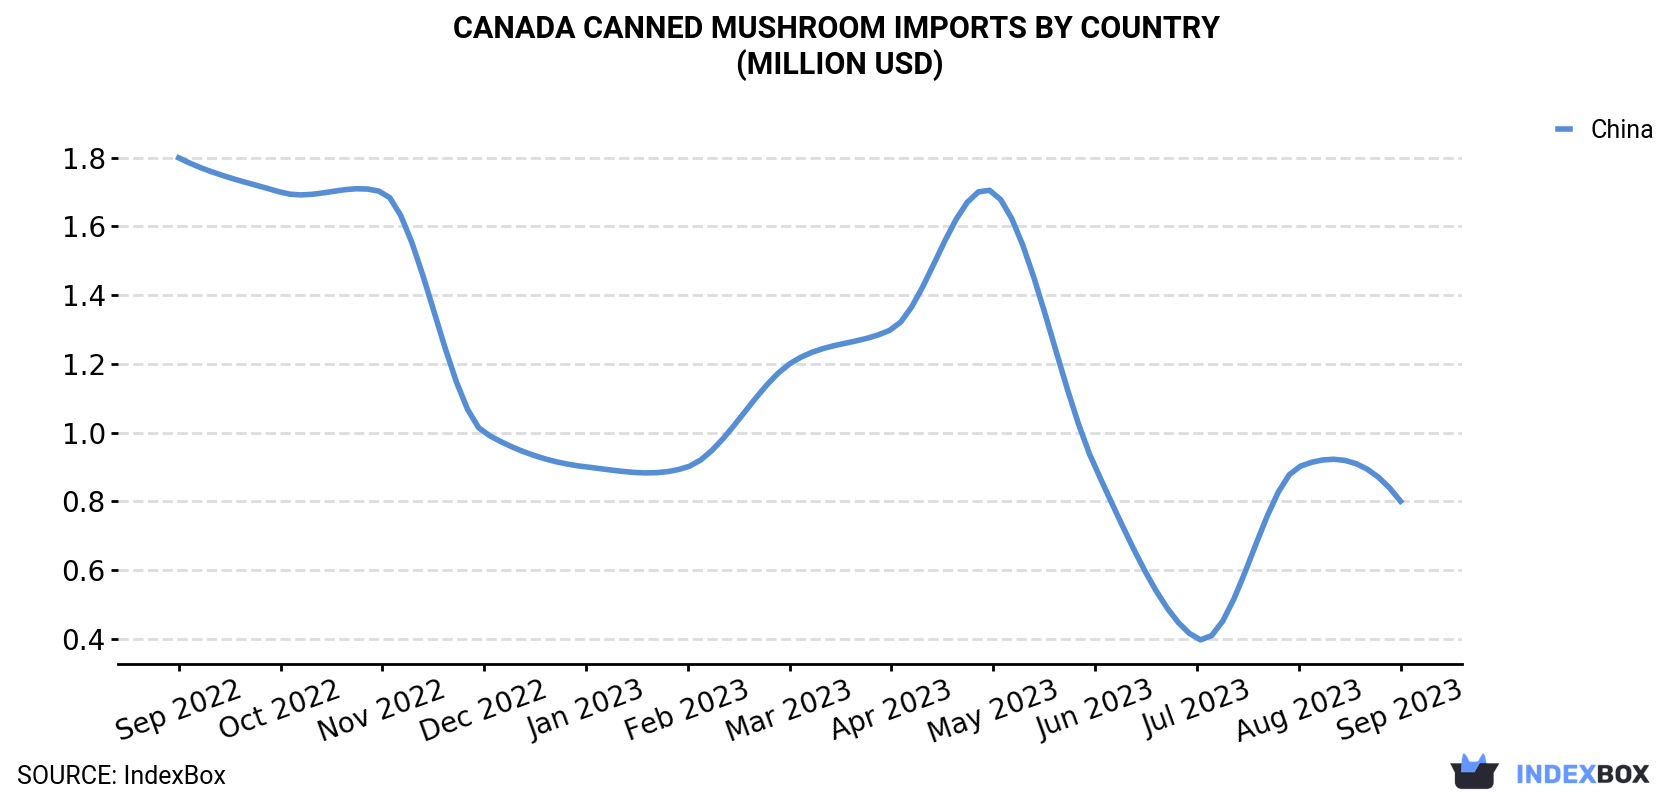 Canada Canned Mushroom Imports By Country (Million USD)